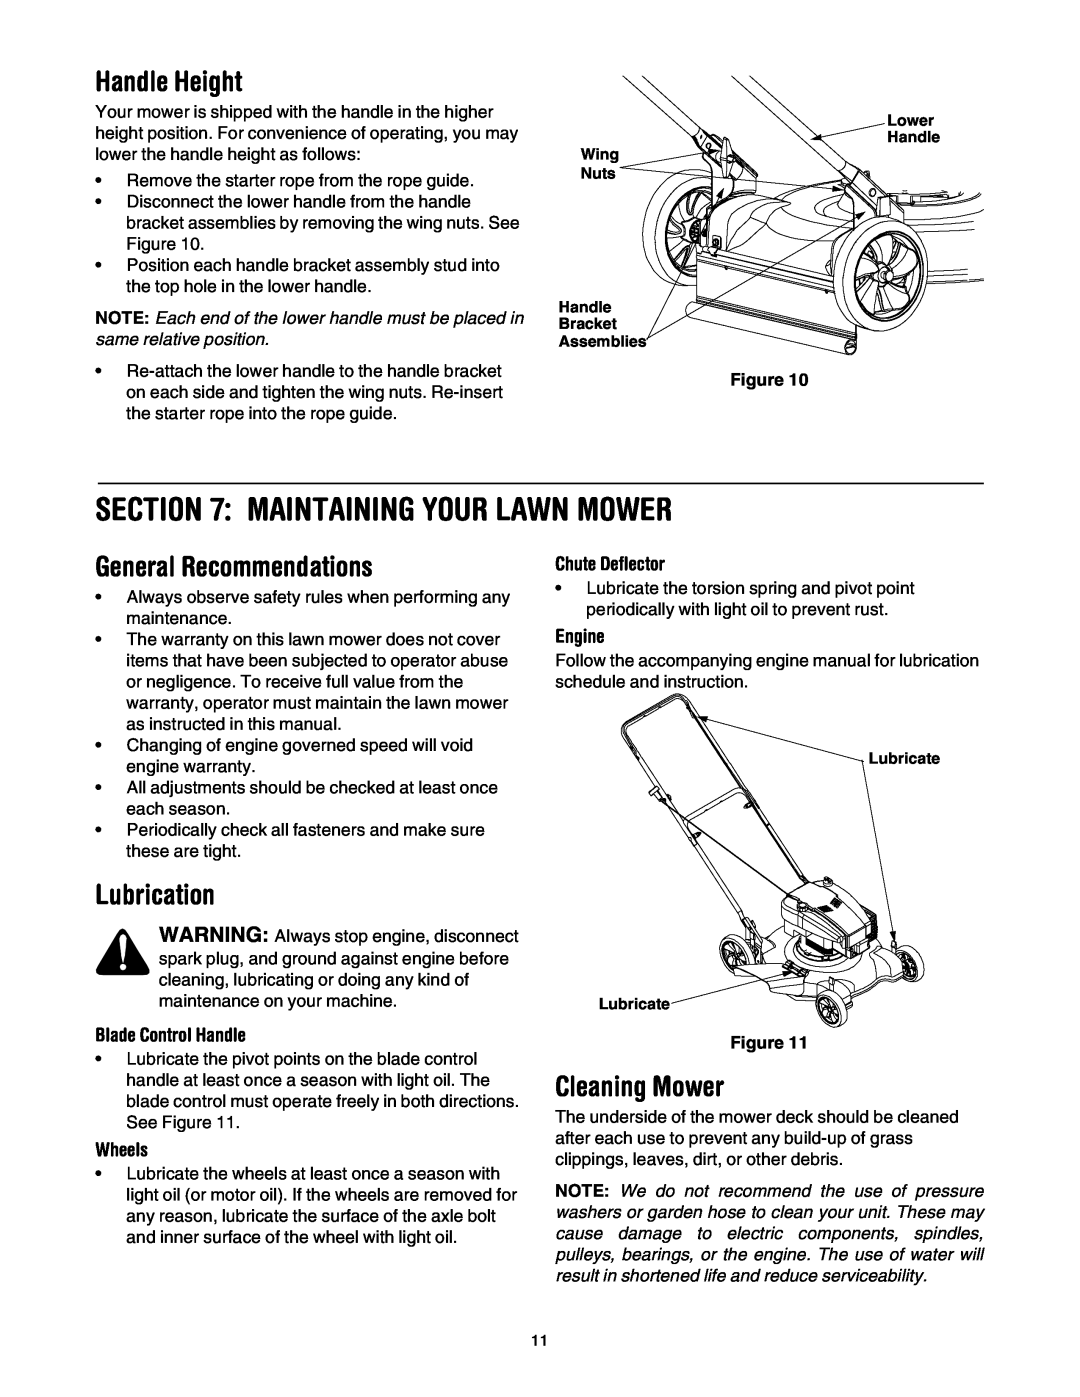 Bolens 84 Maintaining Your Lawn Mower, Handle Height, General Recommendations, Lubrication, Cleaning Mower, Wheels, Engine 